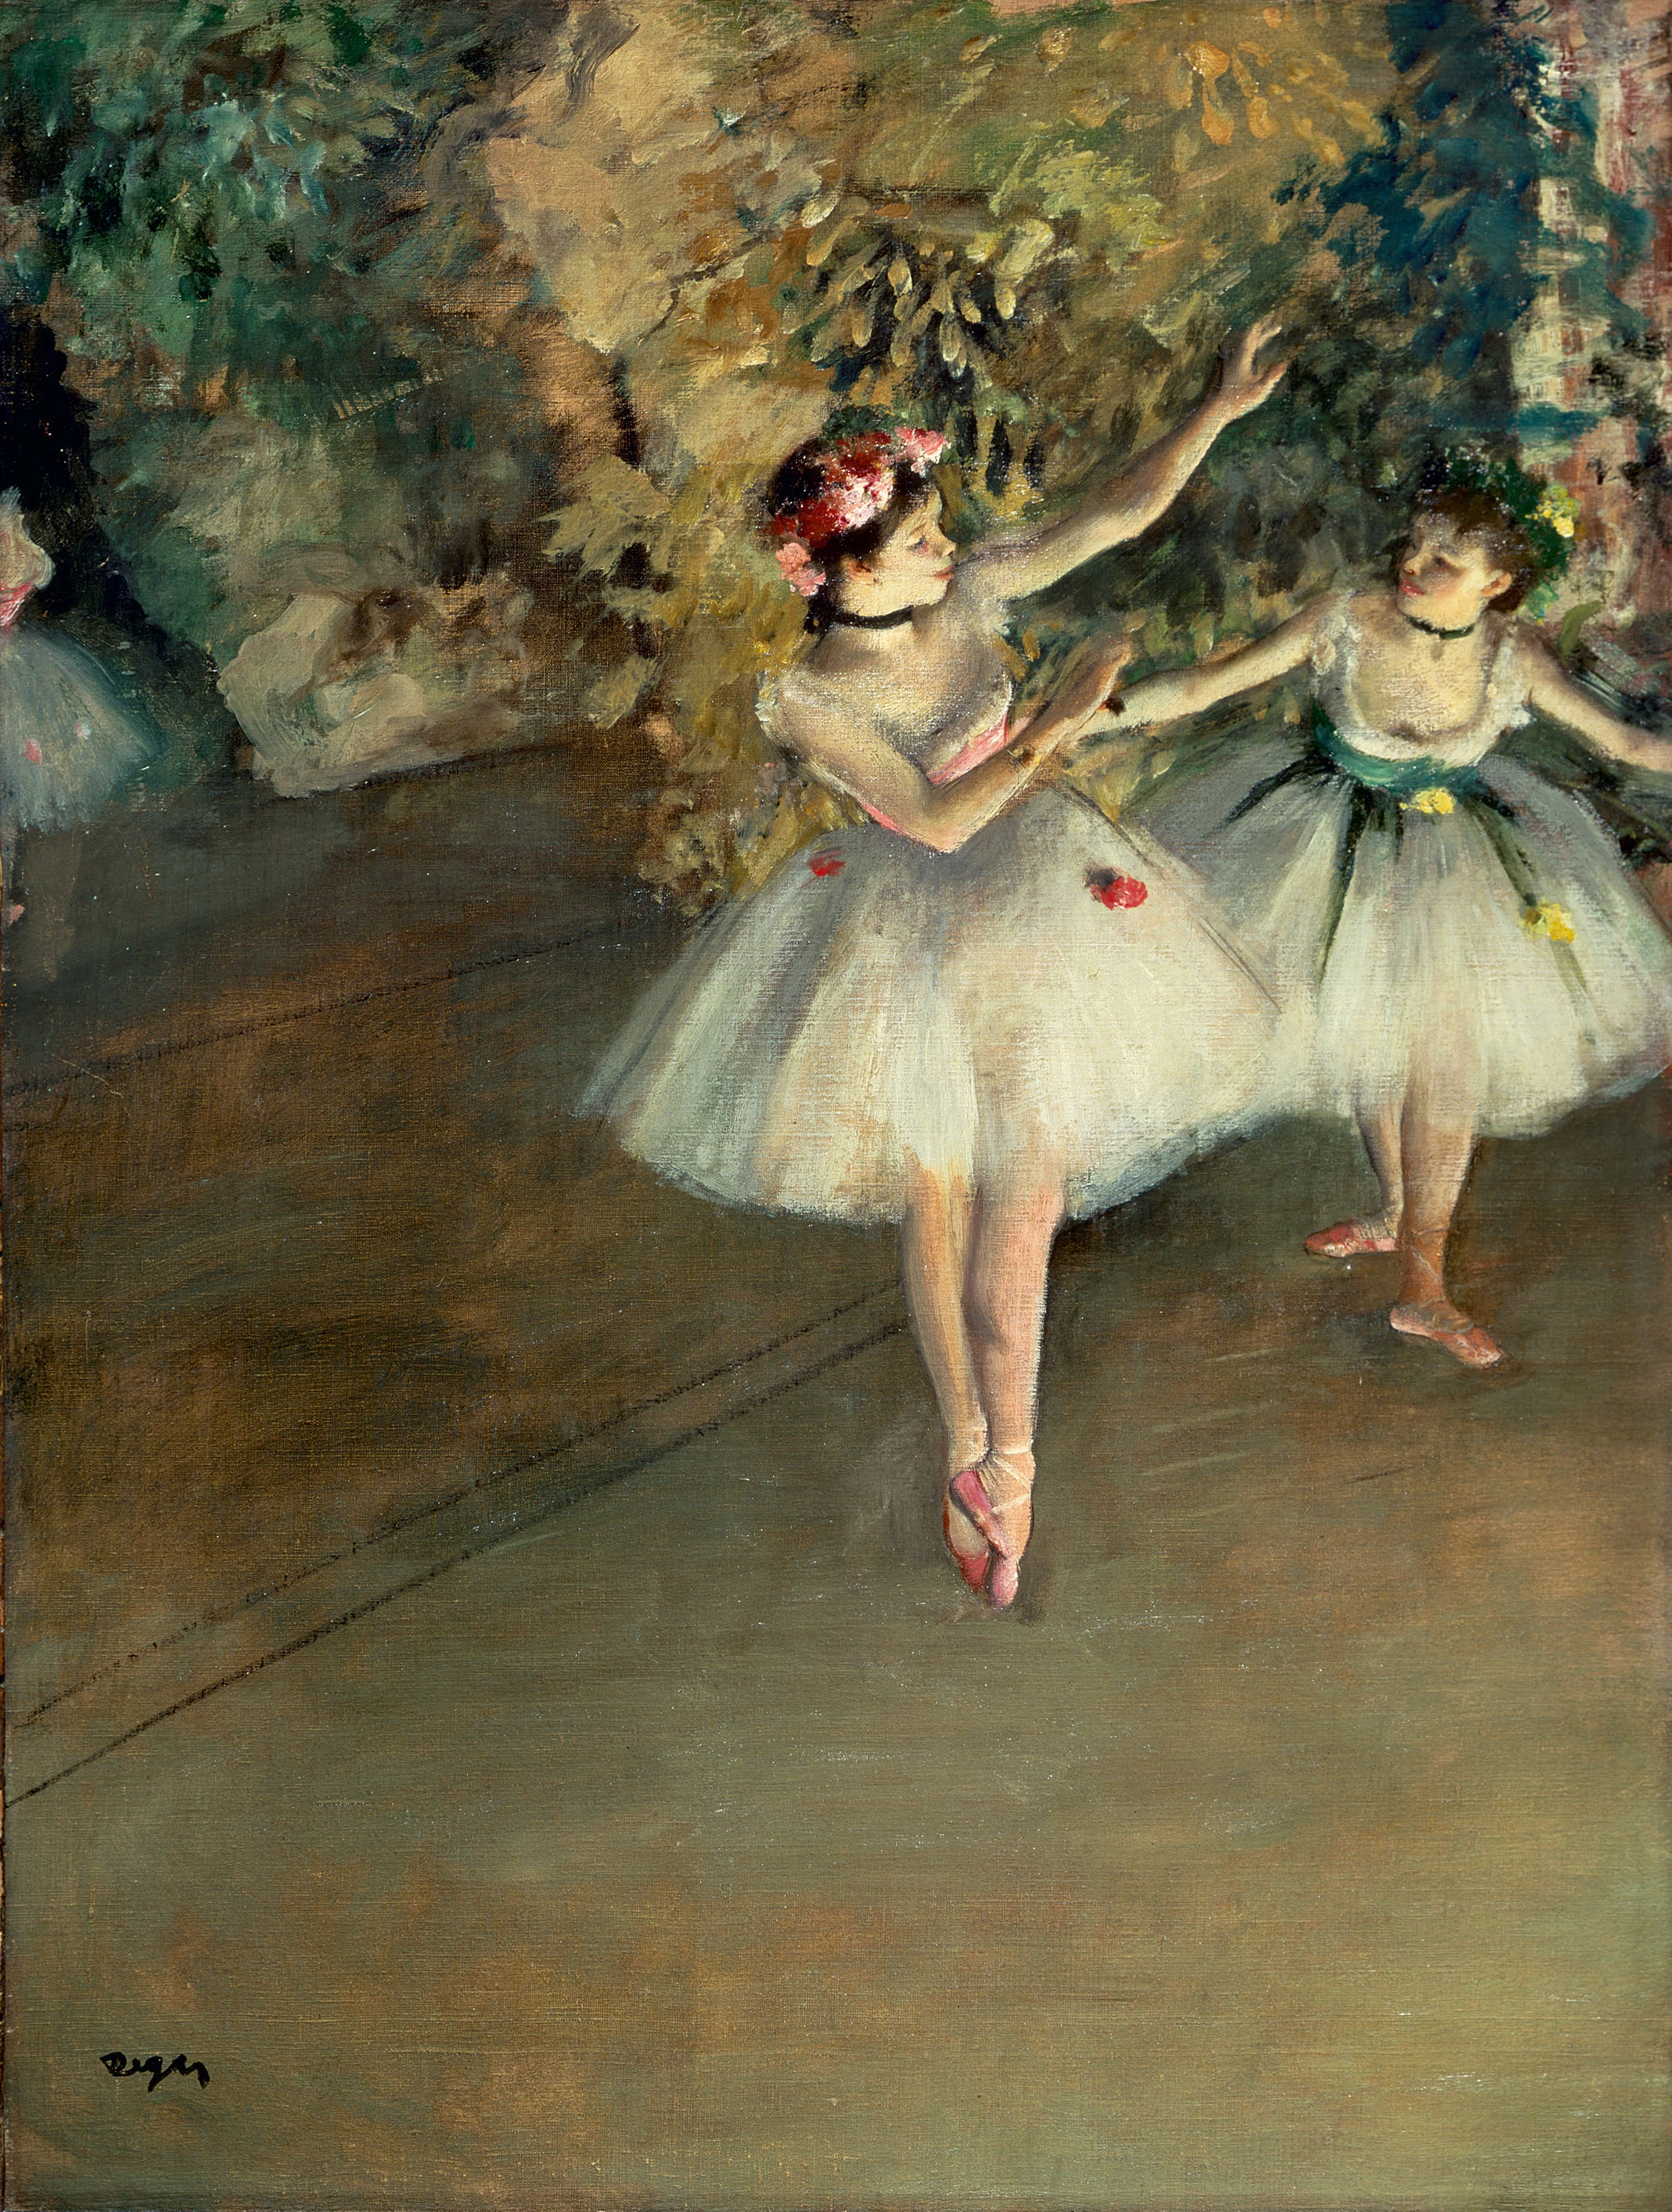 Two Dancers on a Stage, Edgar Degas